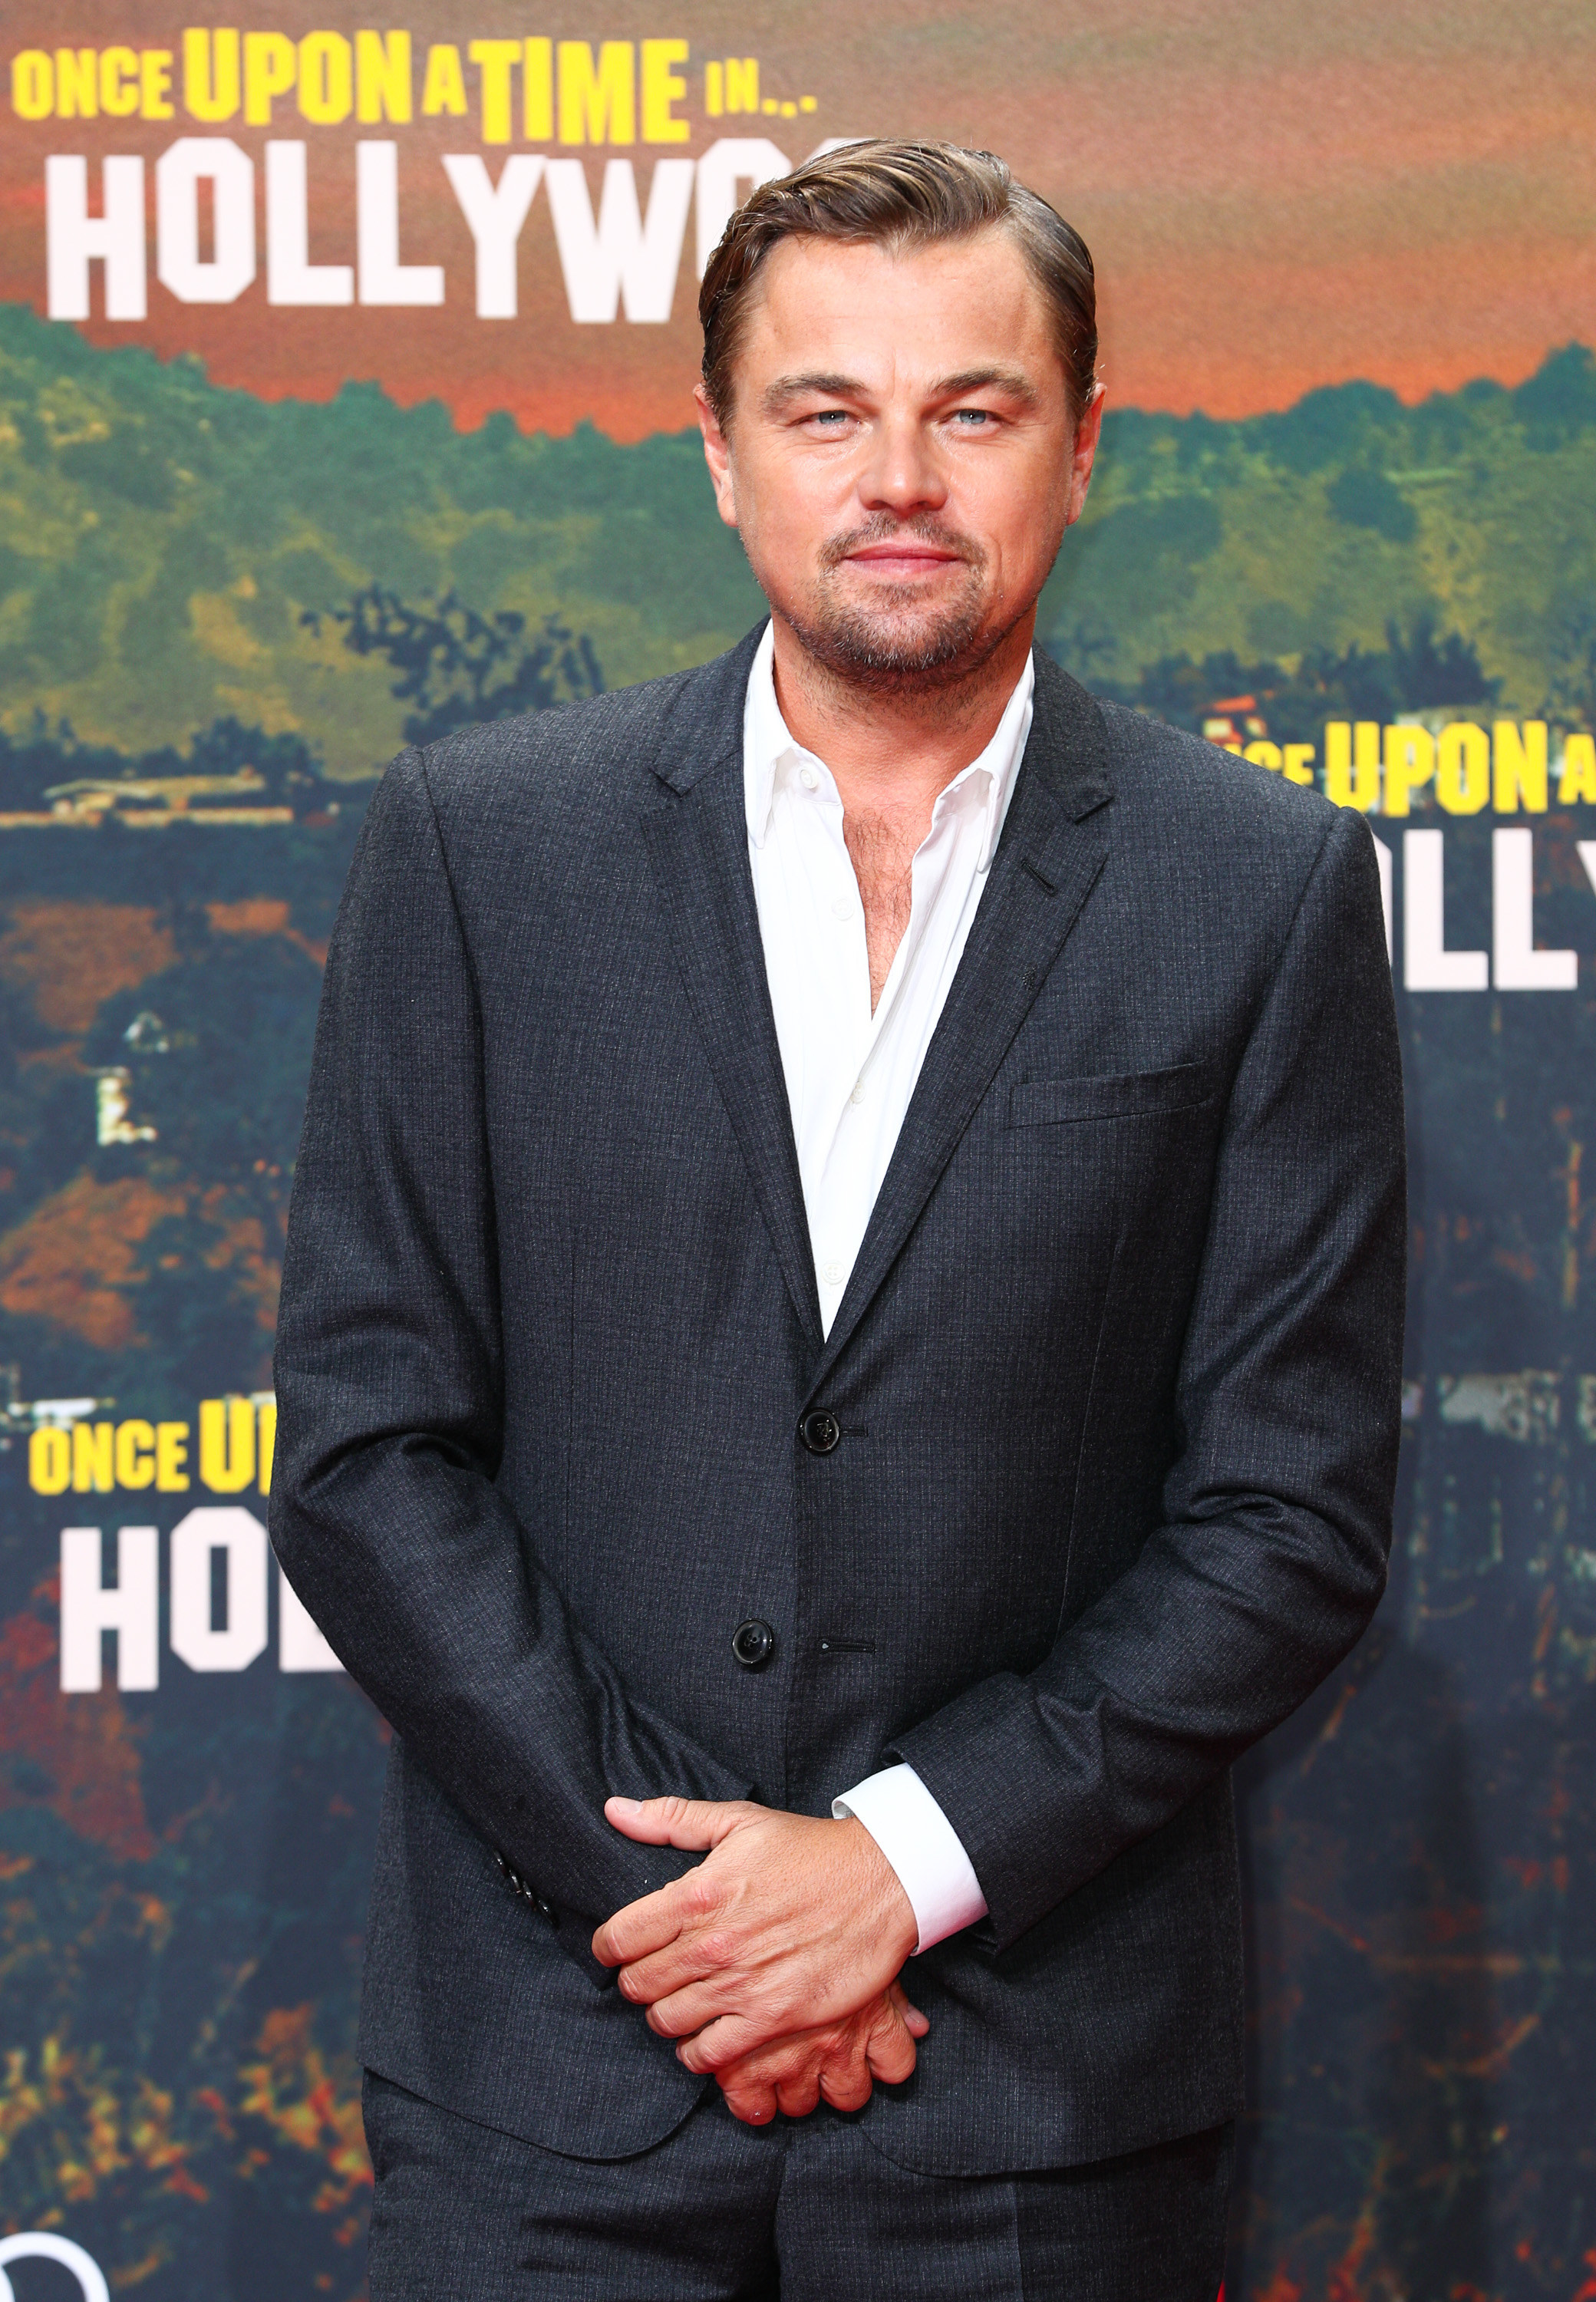 Leonardo DiCaprioattends the premiere of &quot;Once Upon A Time... In Hollywood&quot; at CineStar on August 01, 2019 in Berlin, Germany